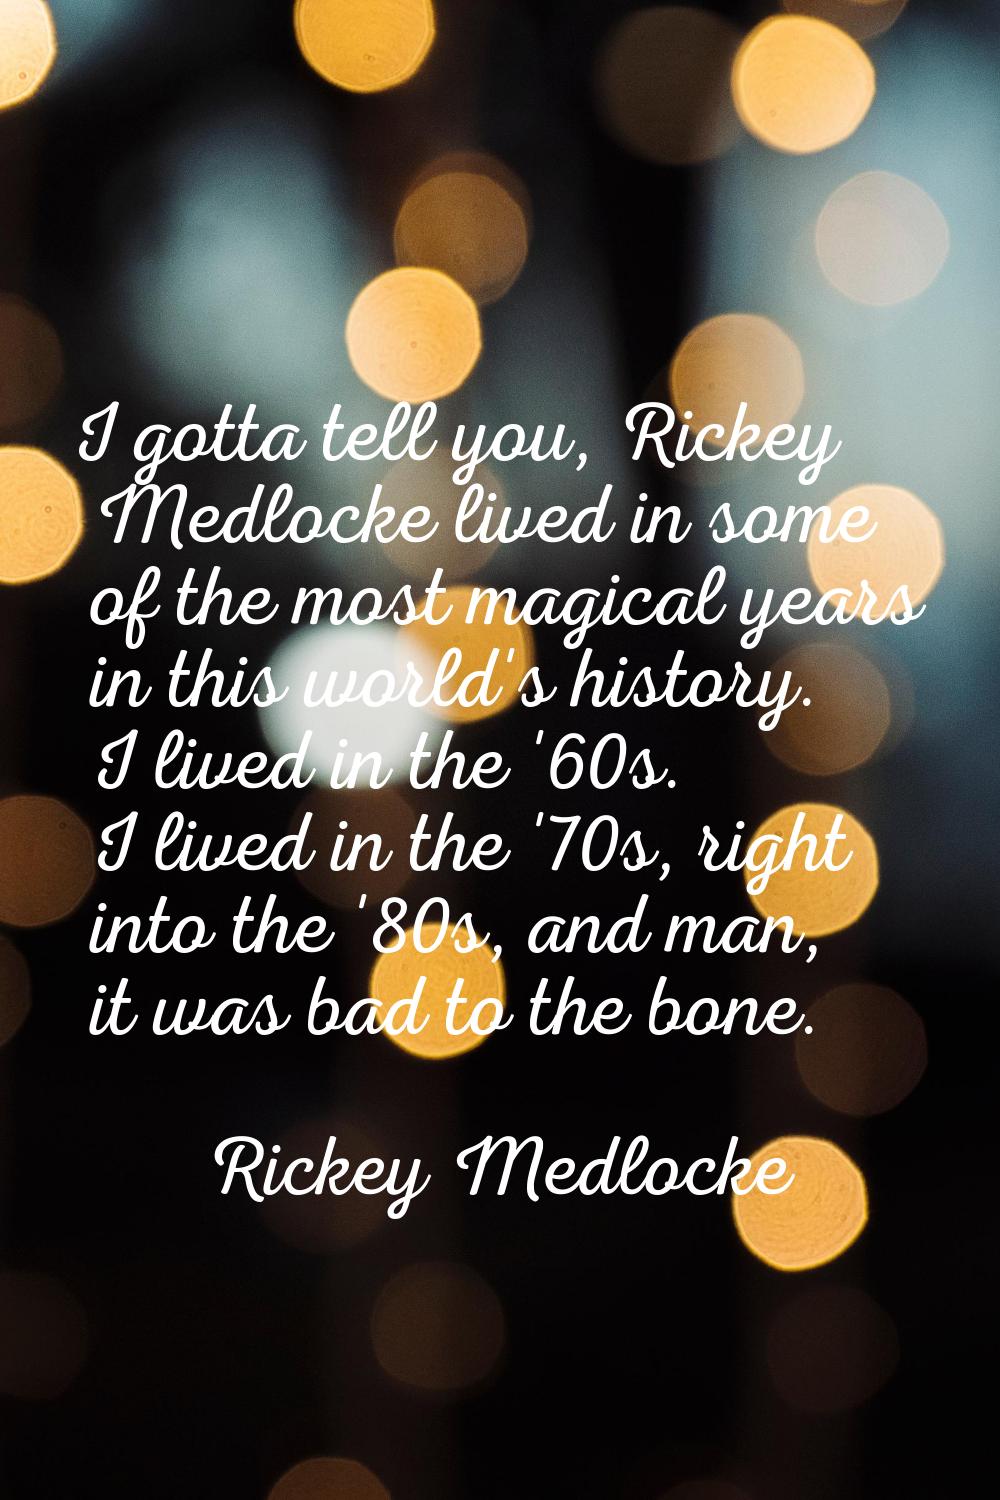 I gotta tell you, Rickey Medlocke lived in some of the most magical years in this world's history. 